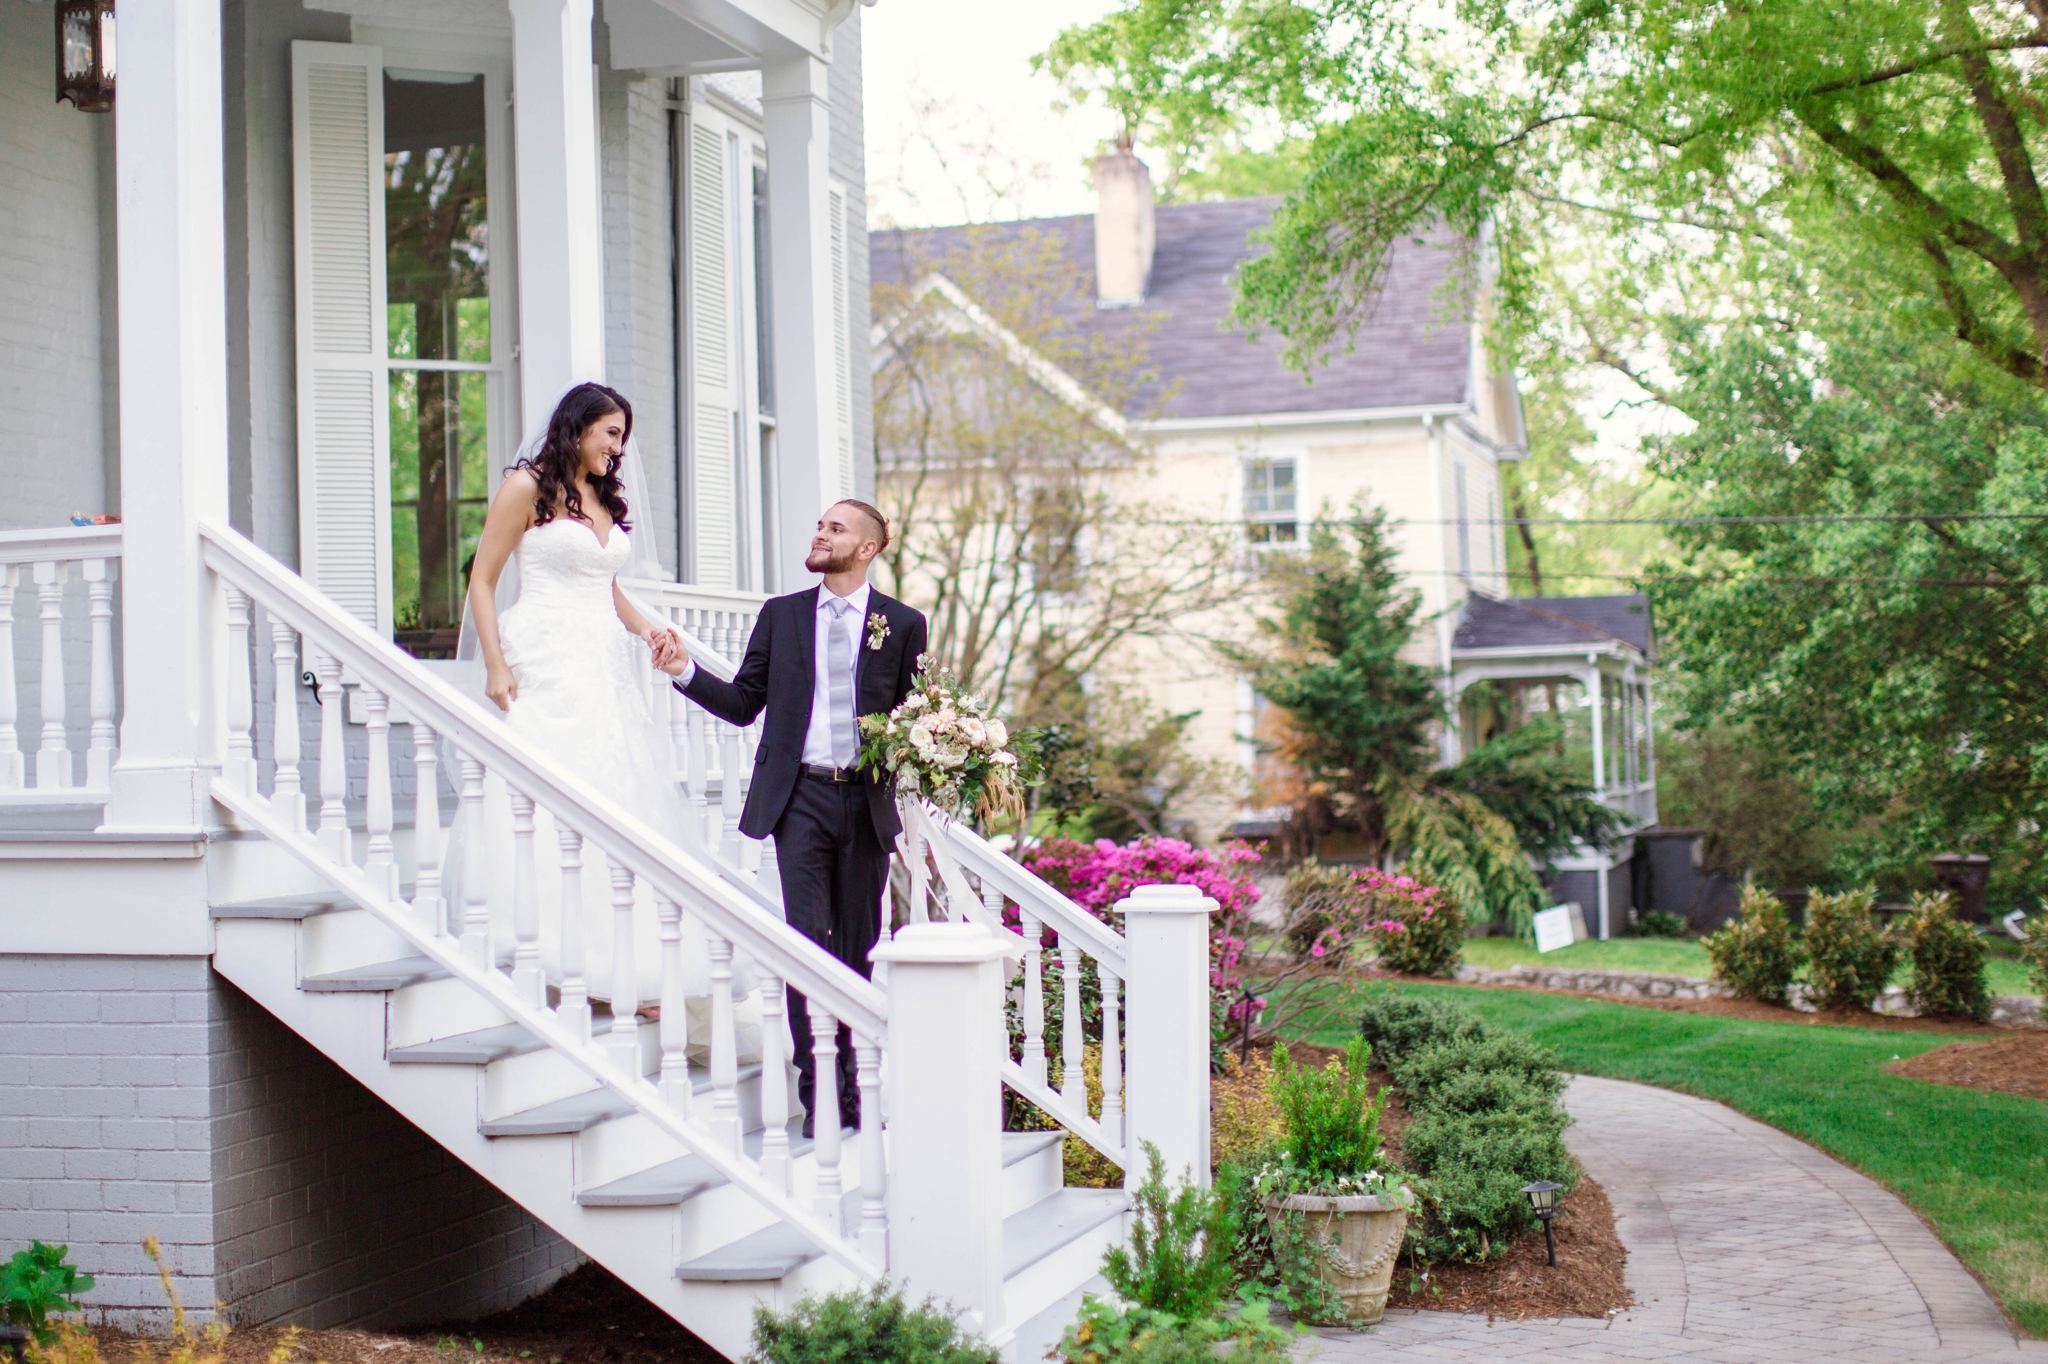  Groom leading his bride down the front steps -Couple Kissing - Wedding Portraits on the front porch of an all white luxury estate mansion - Bride is wearing a Aline Ballgown by Cherish by Southern Bride with a long cathedral veil - Groom is wearing 